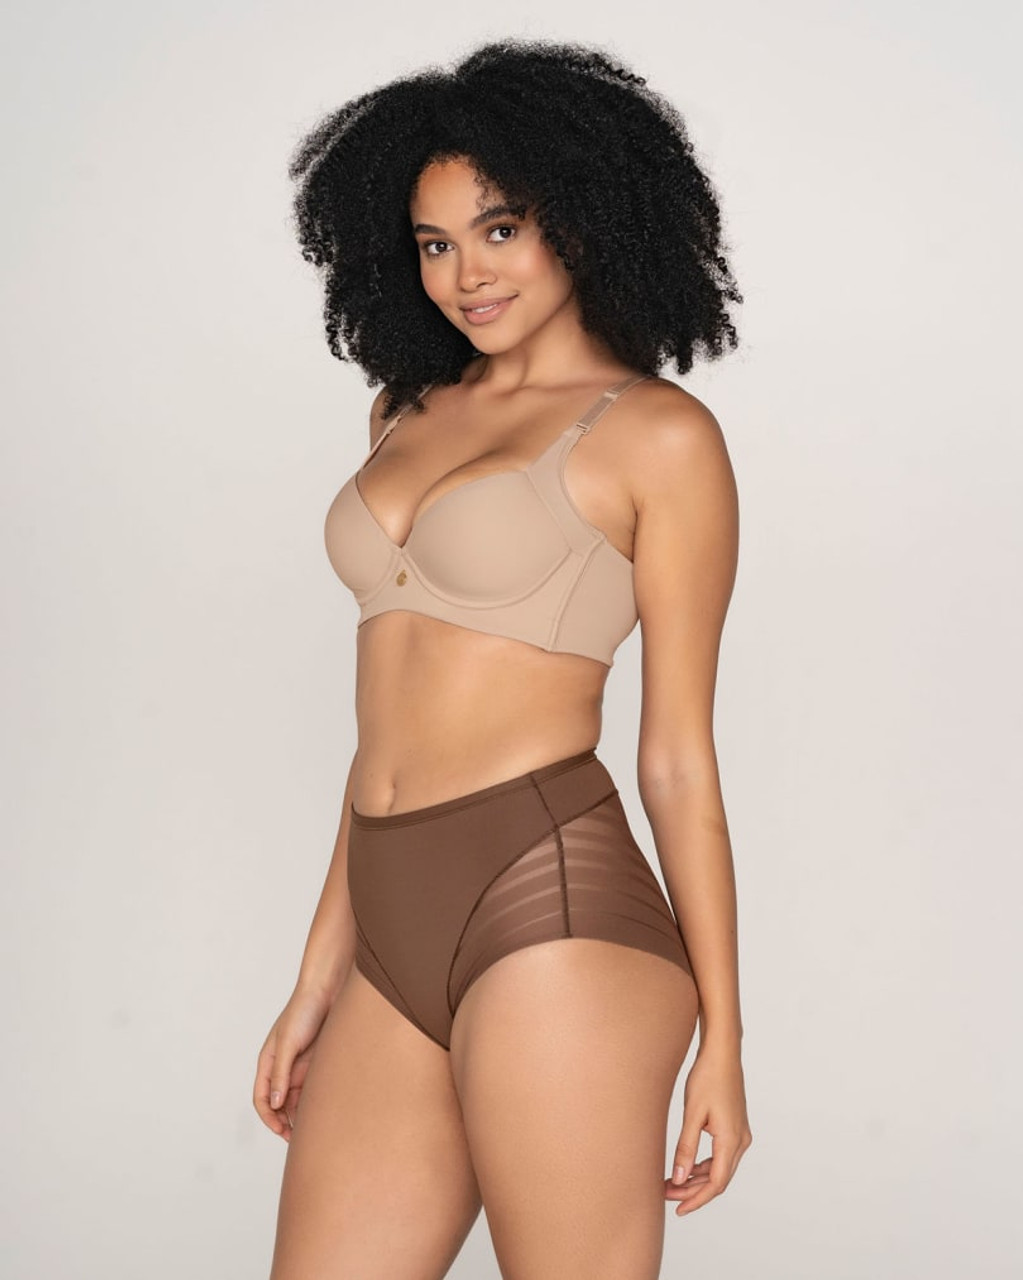 Leonisa Lace Stripe Undetectable Classic Shaper Panty – Art of Intimates